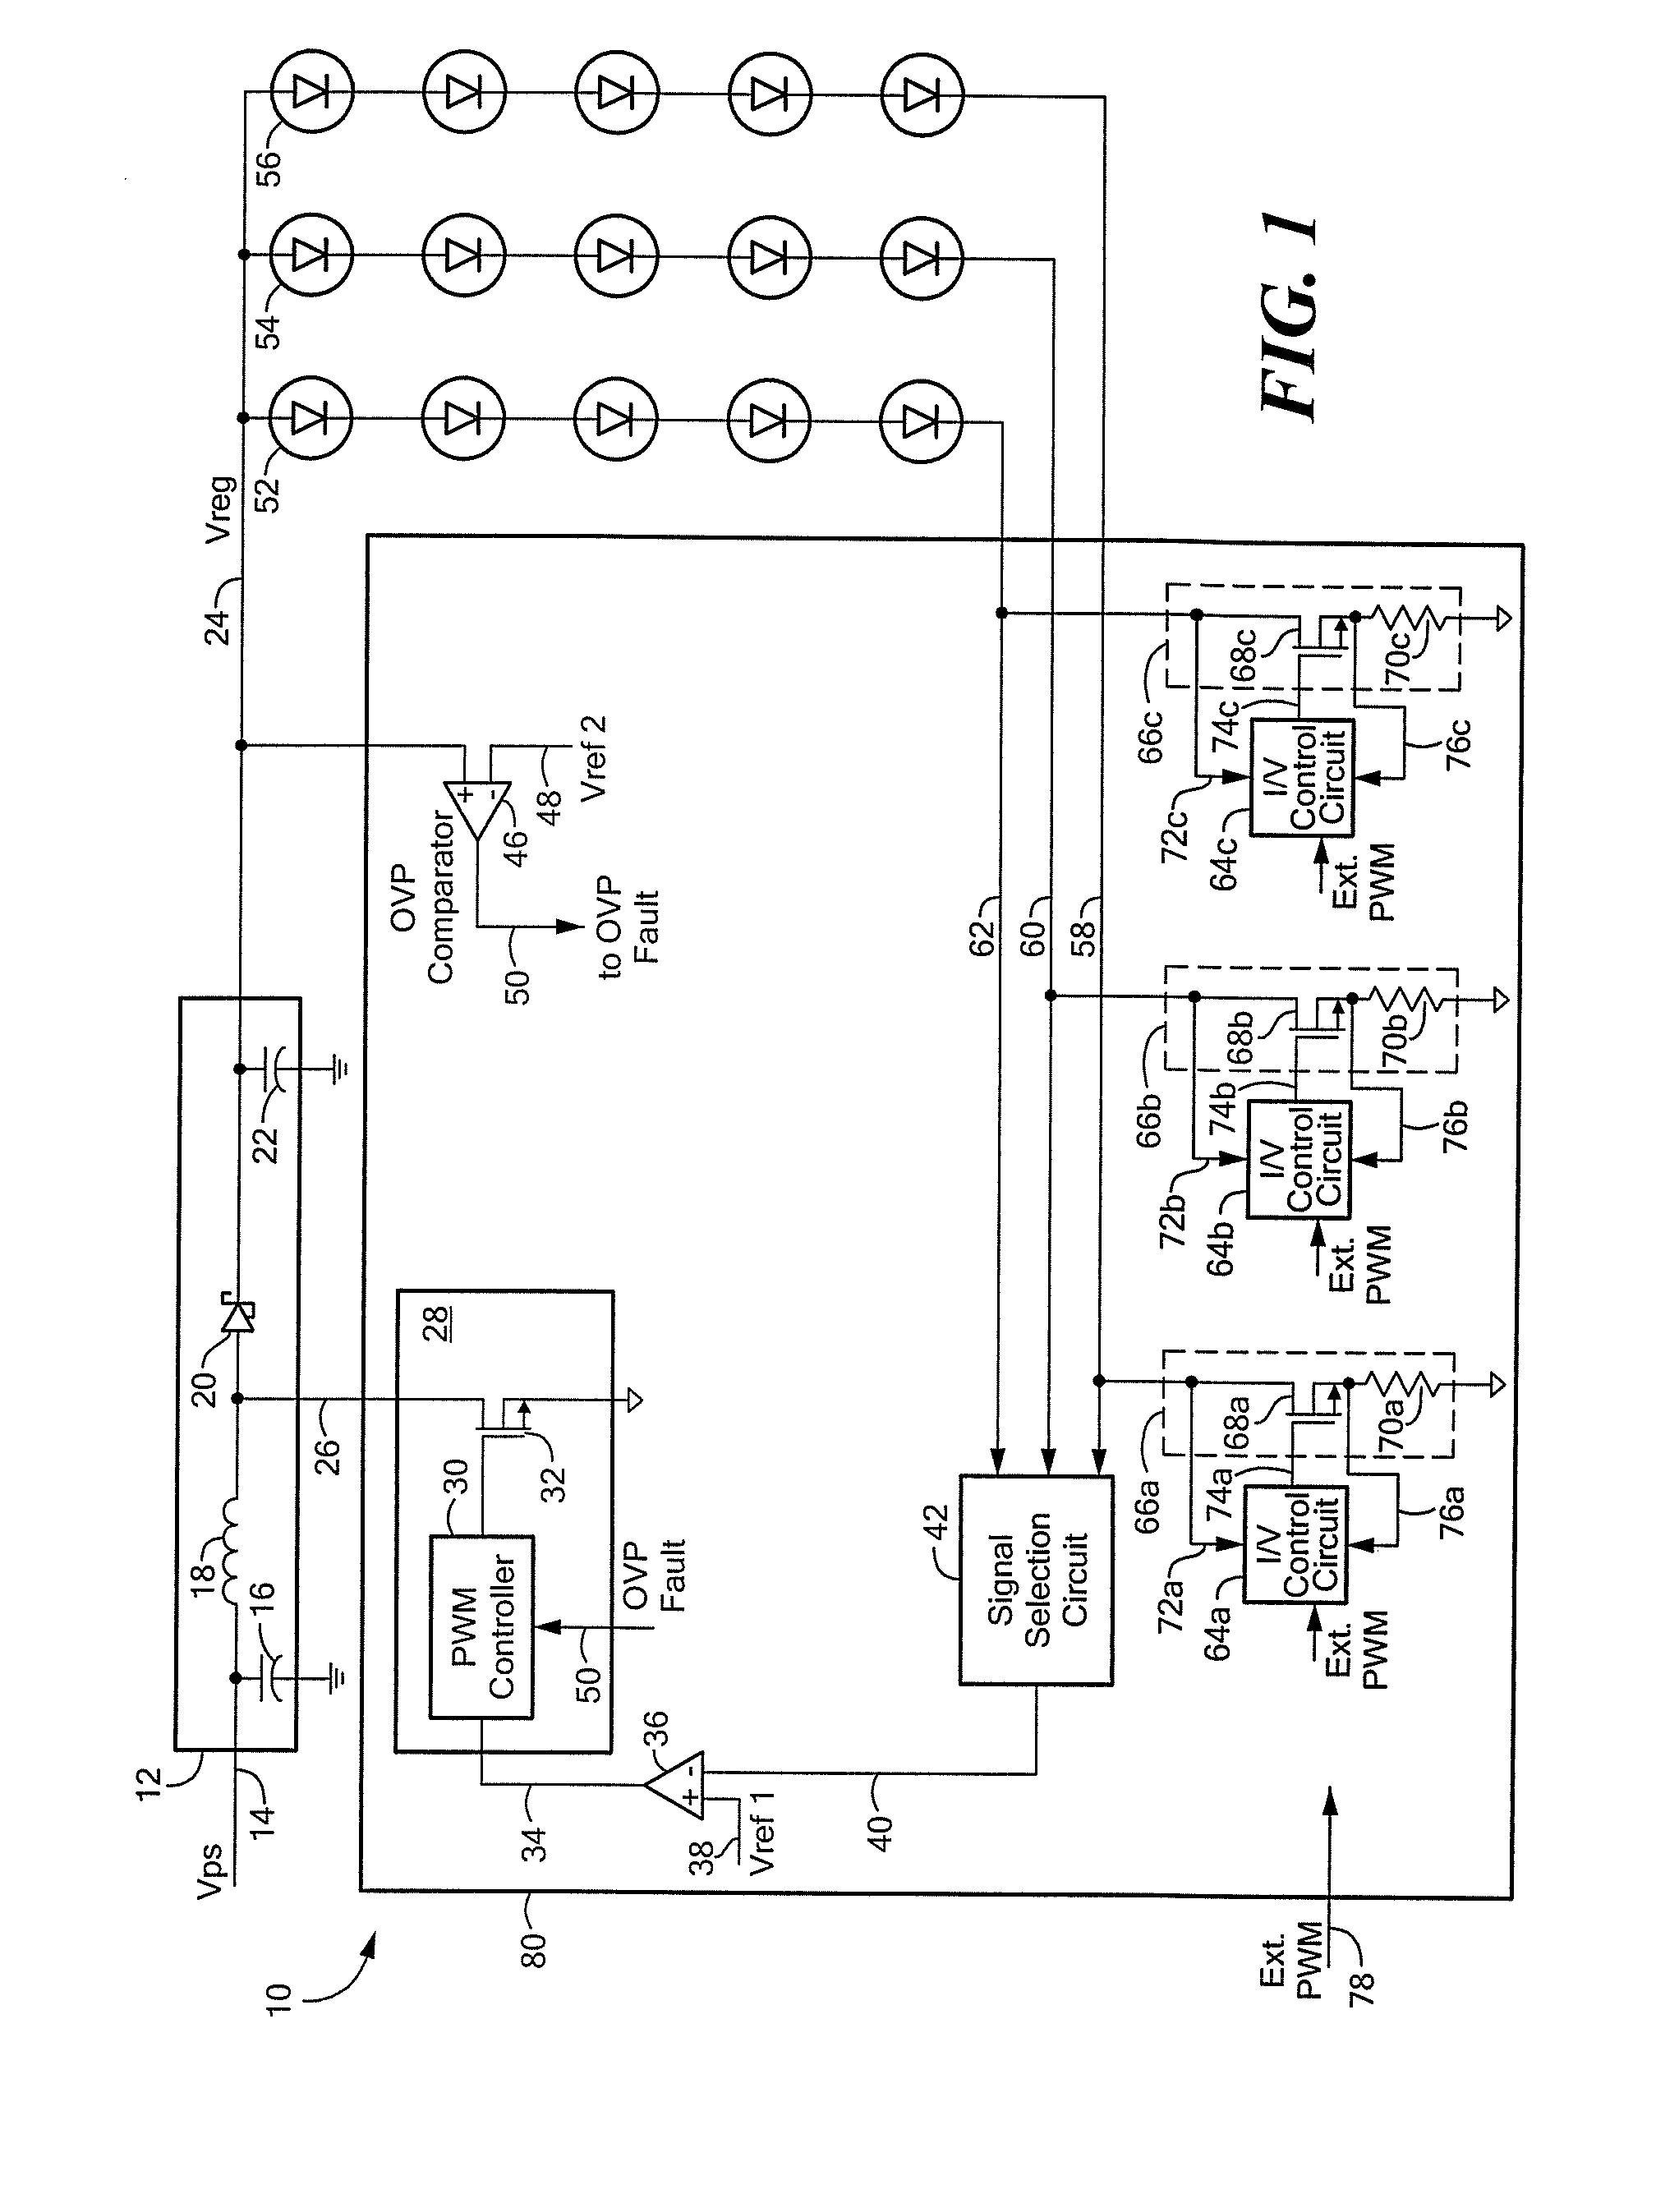 Electronic circuit for driving a diode load with a predetermined average current